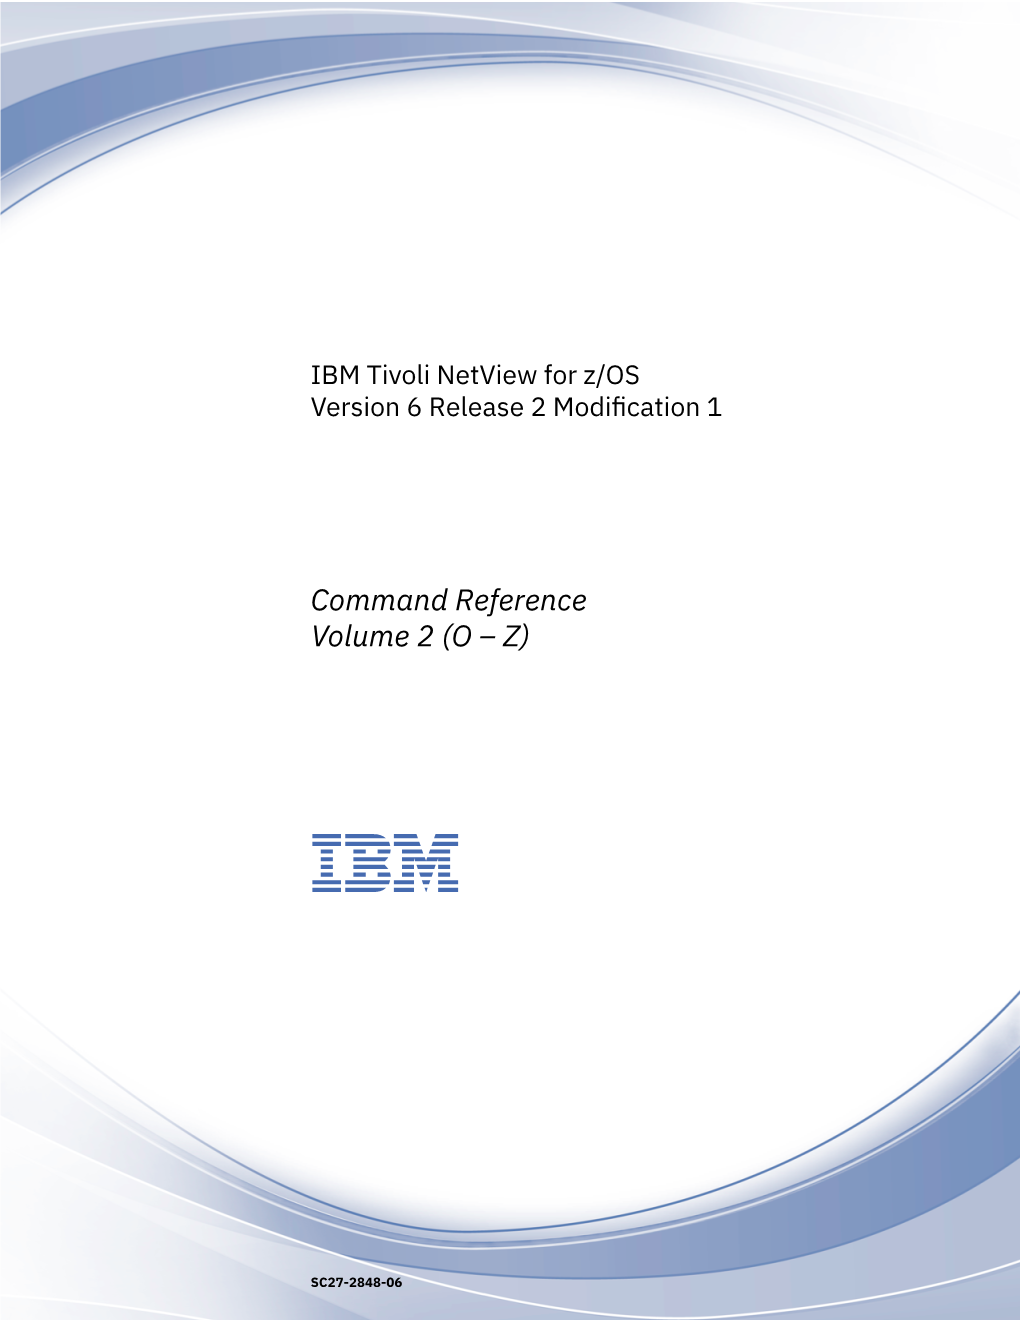 IBM Tivoli Netview for Z/OS: Command Reference Volume 2 (O-Z) for Netview for Z/OS Terms and Definitions, See the IBM Terminology Web Site